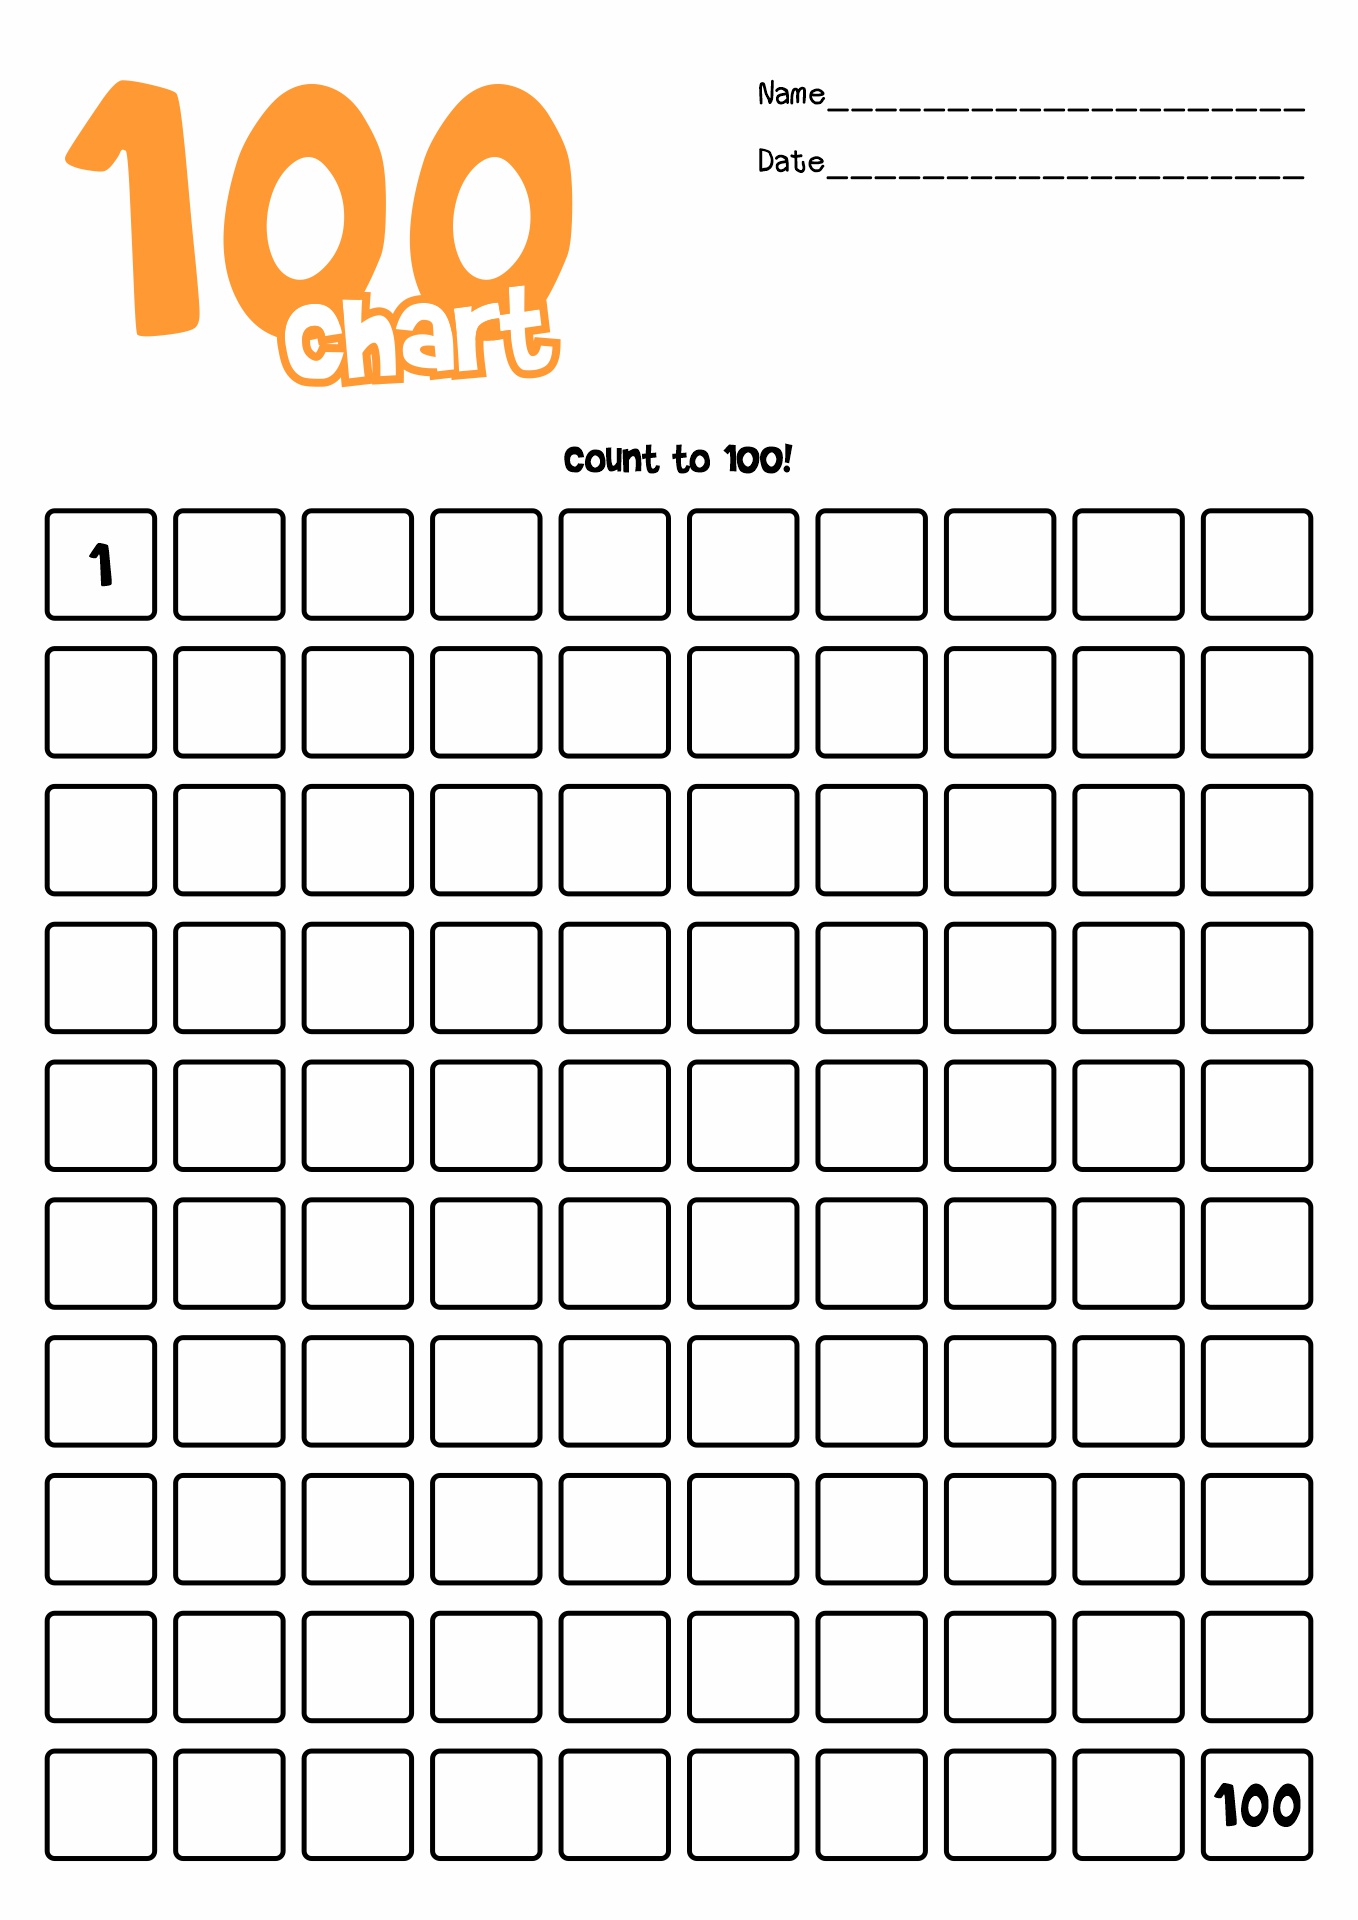 Blank Number Chart 1 100 Image